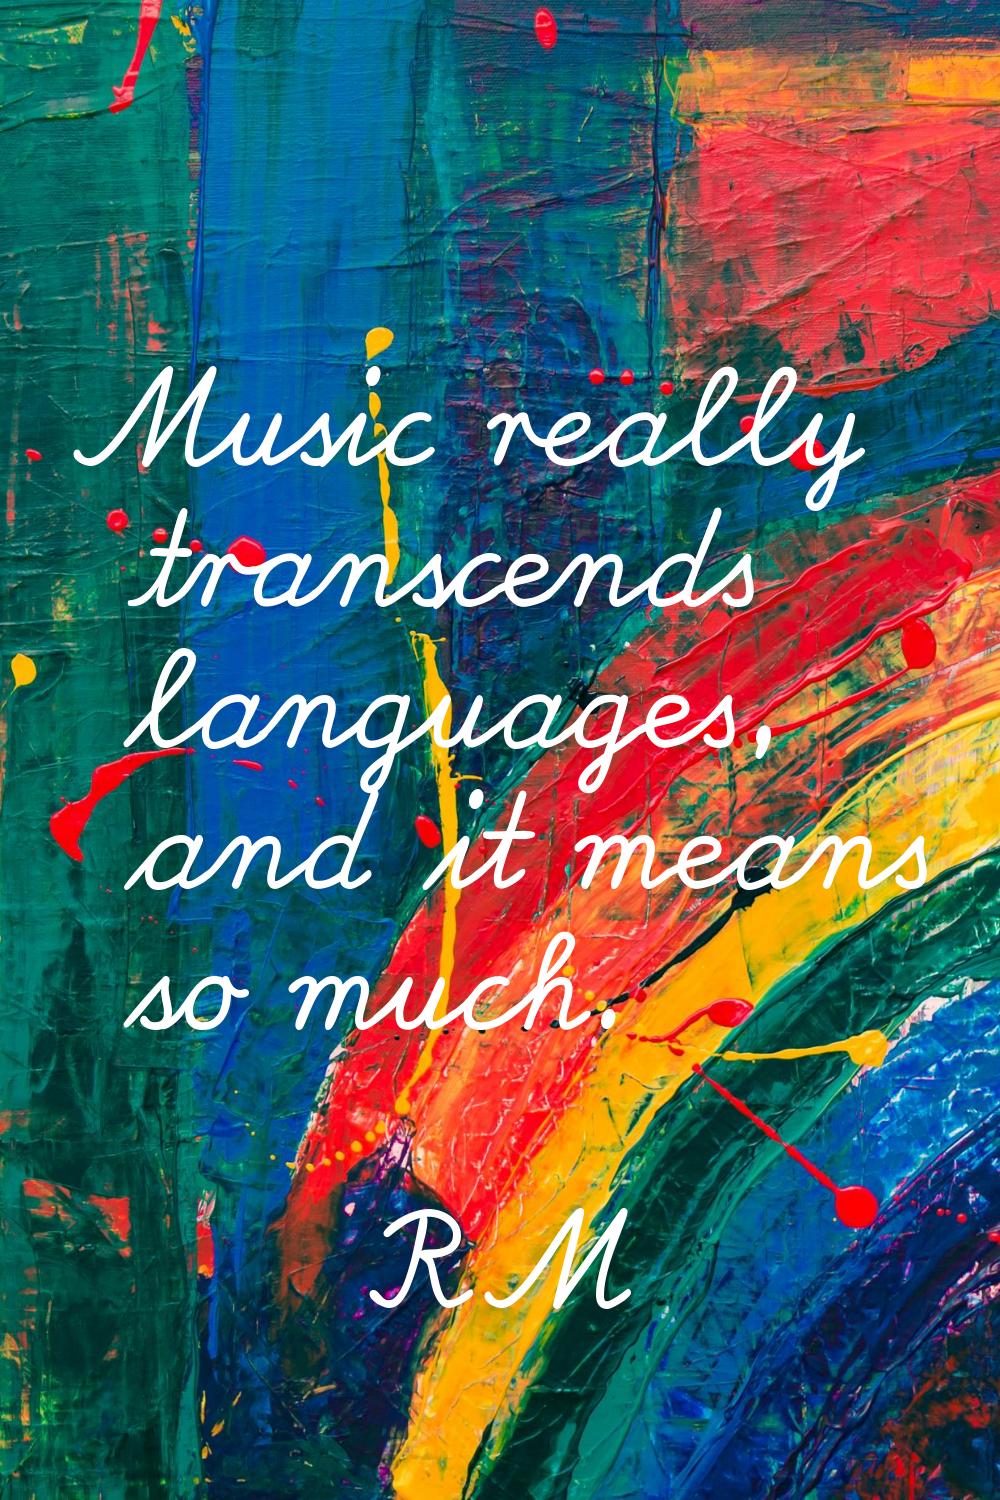 Music really transcends languages, and it means so much.